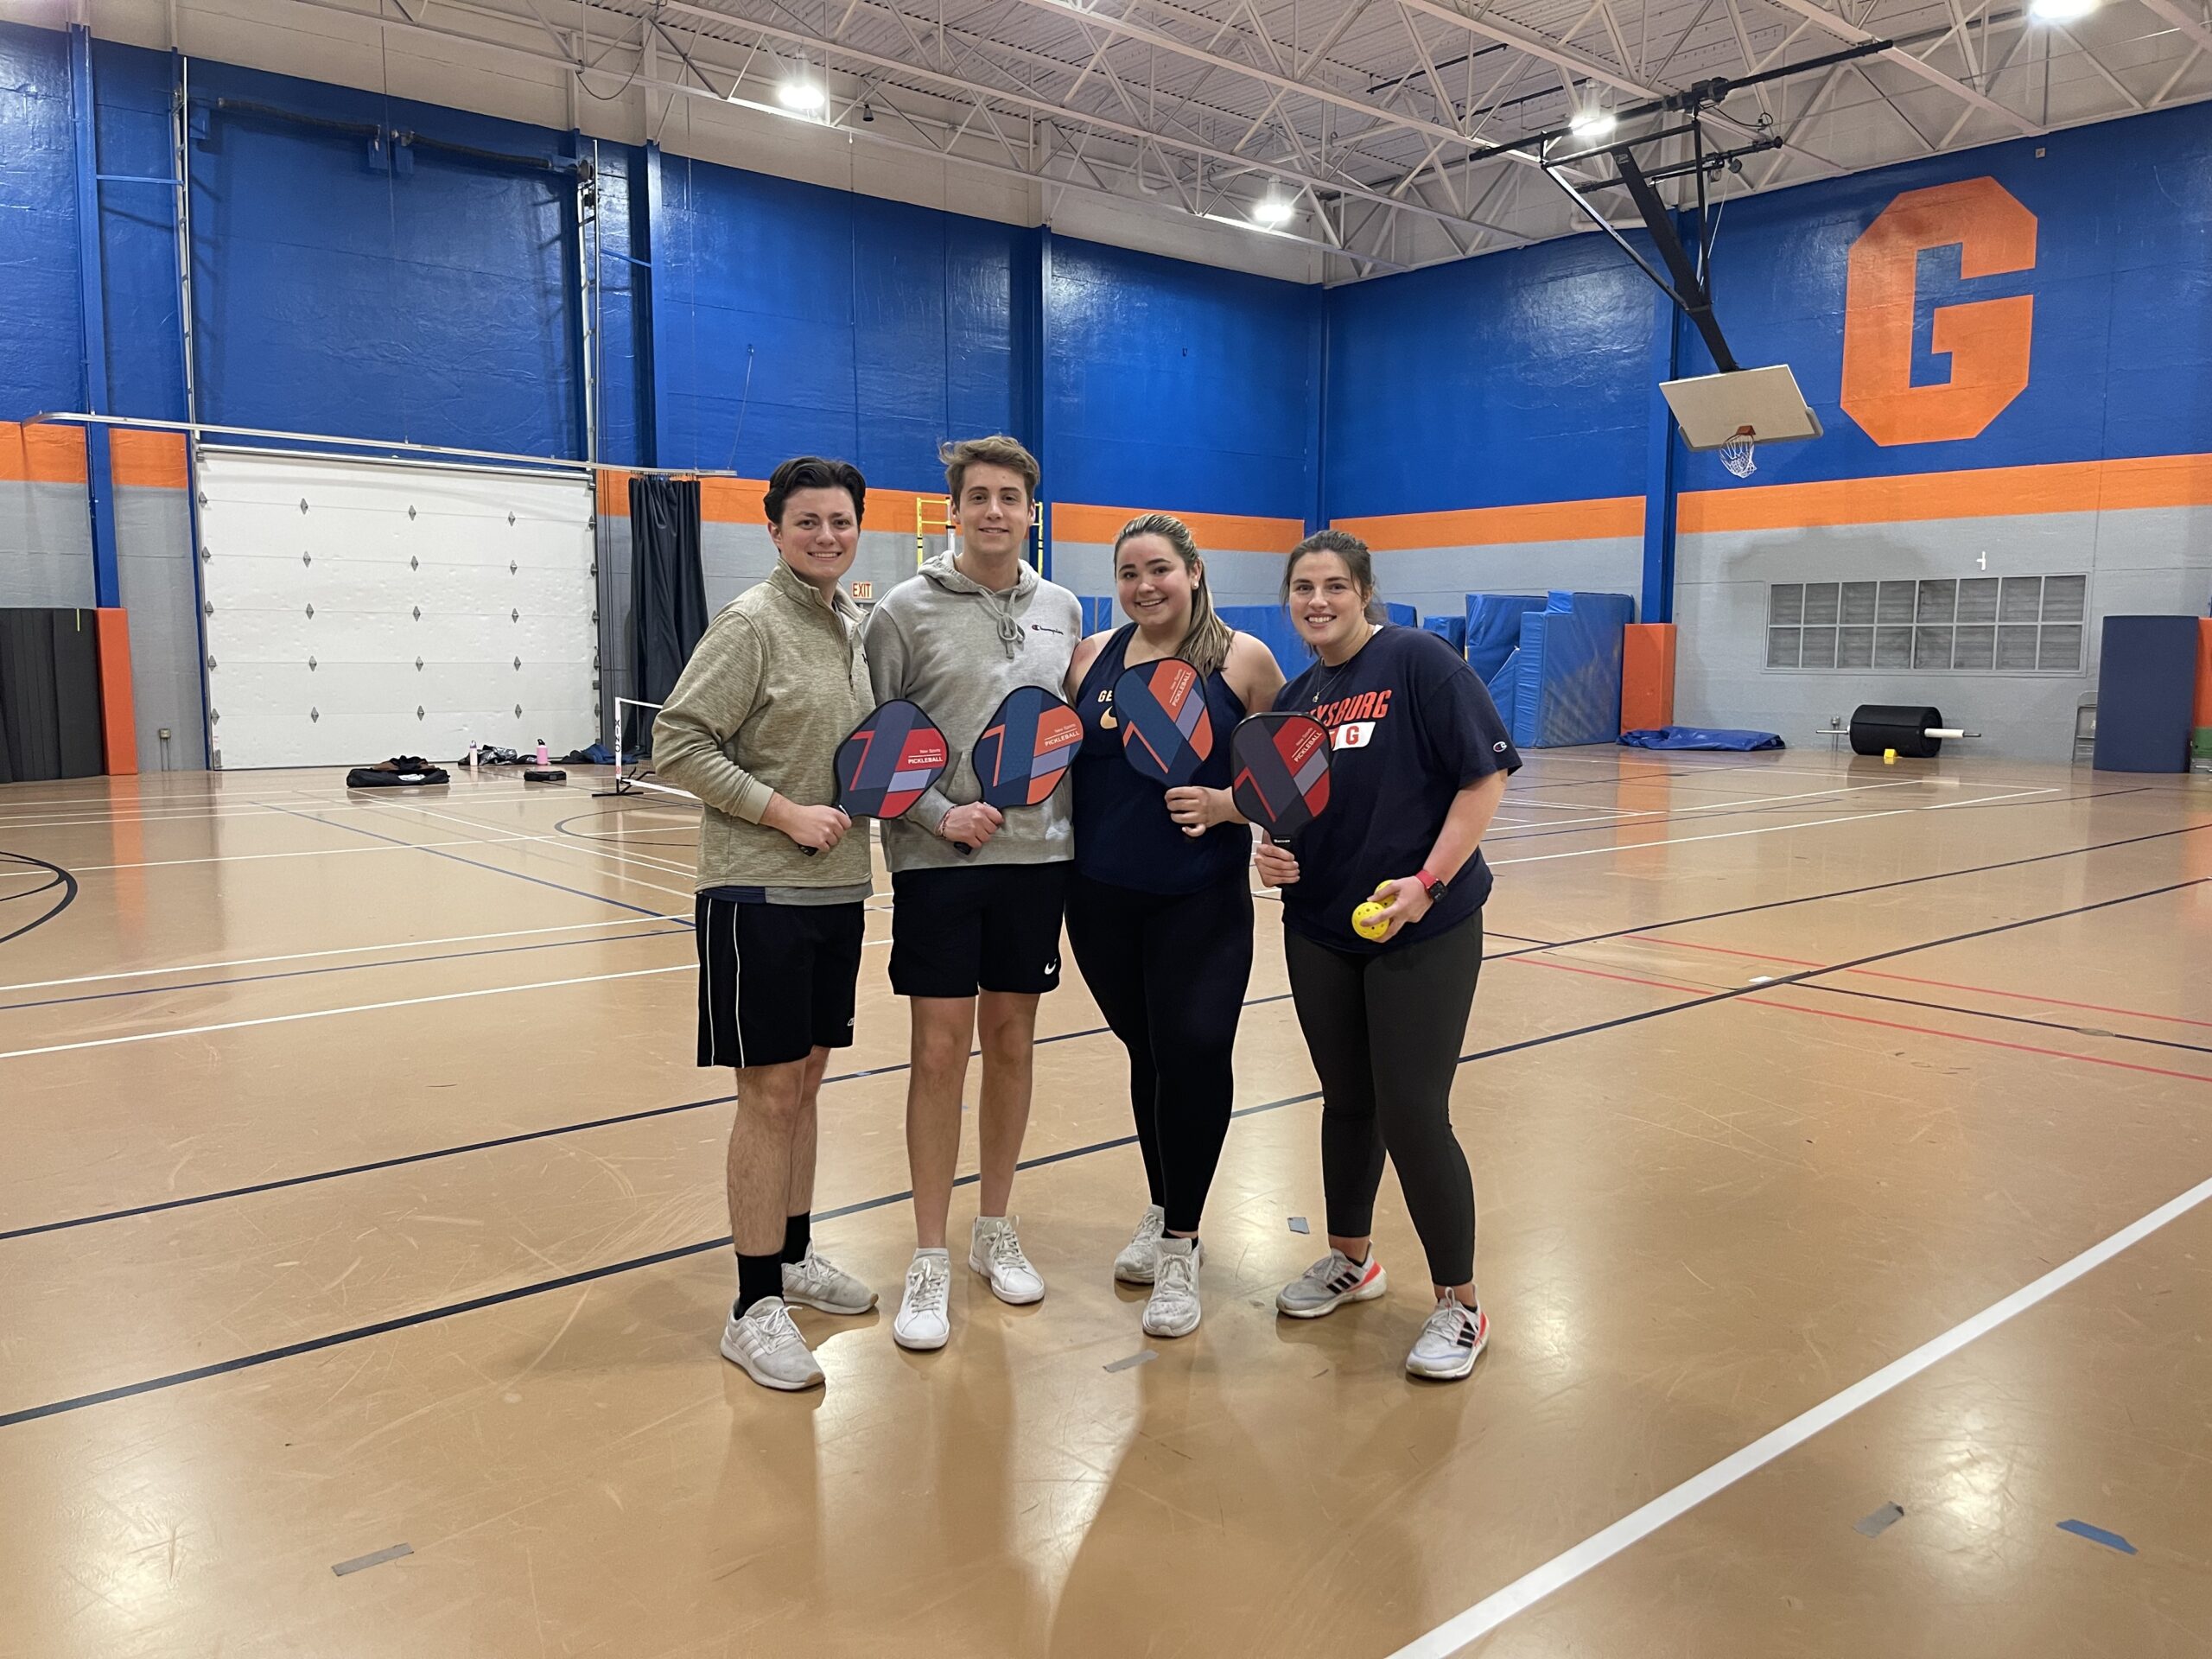 The Formation of the Pickleball Club at Gettysburg College